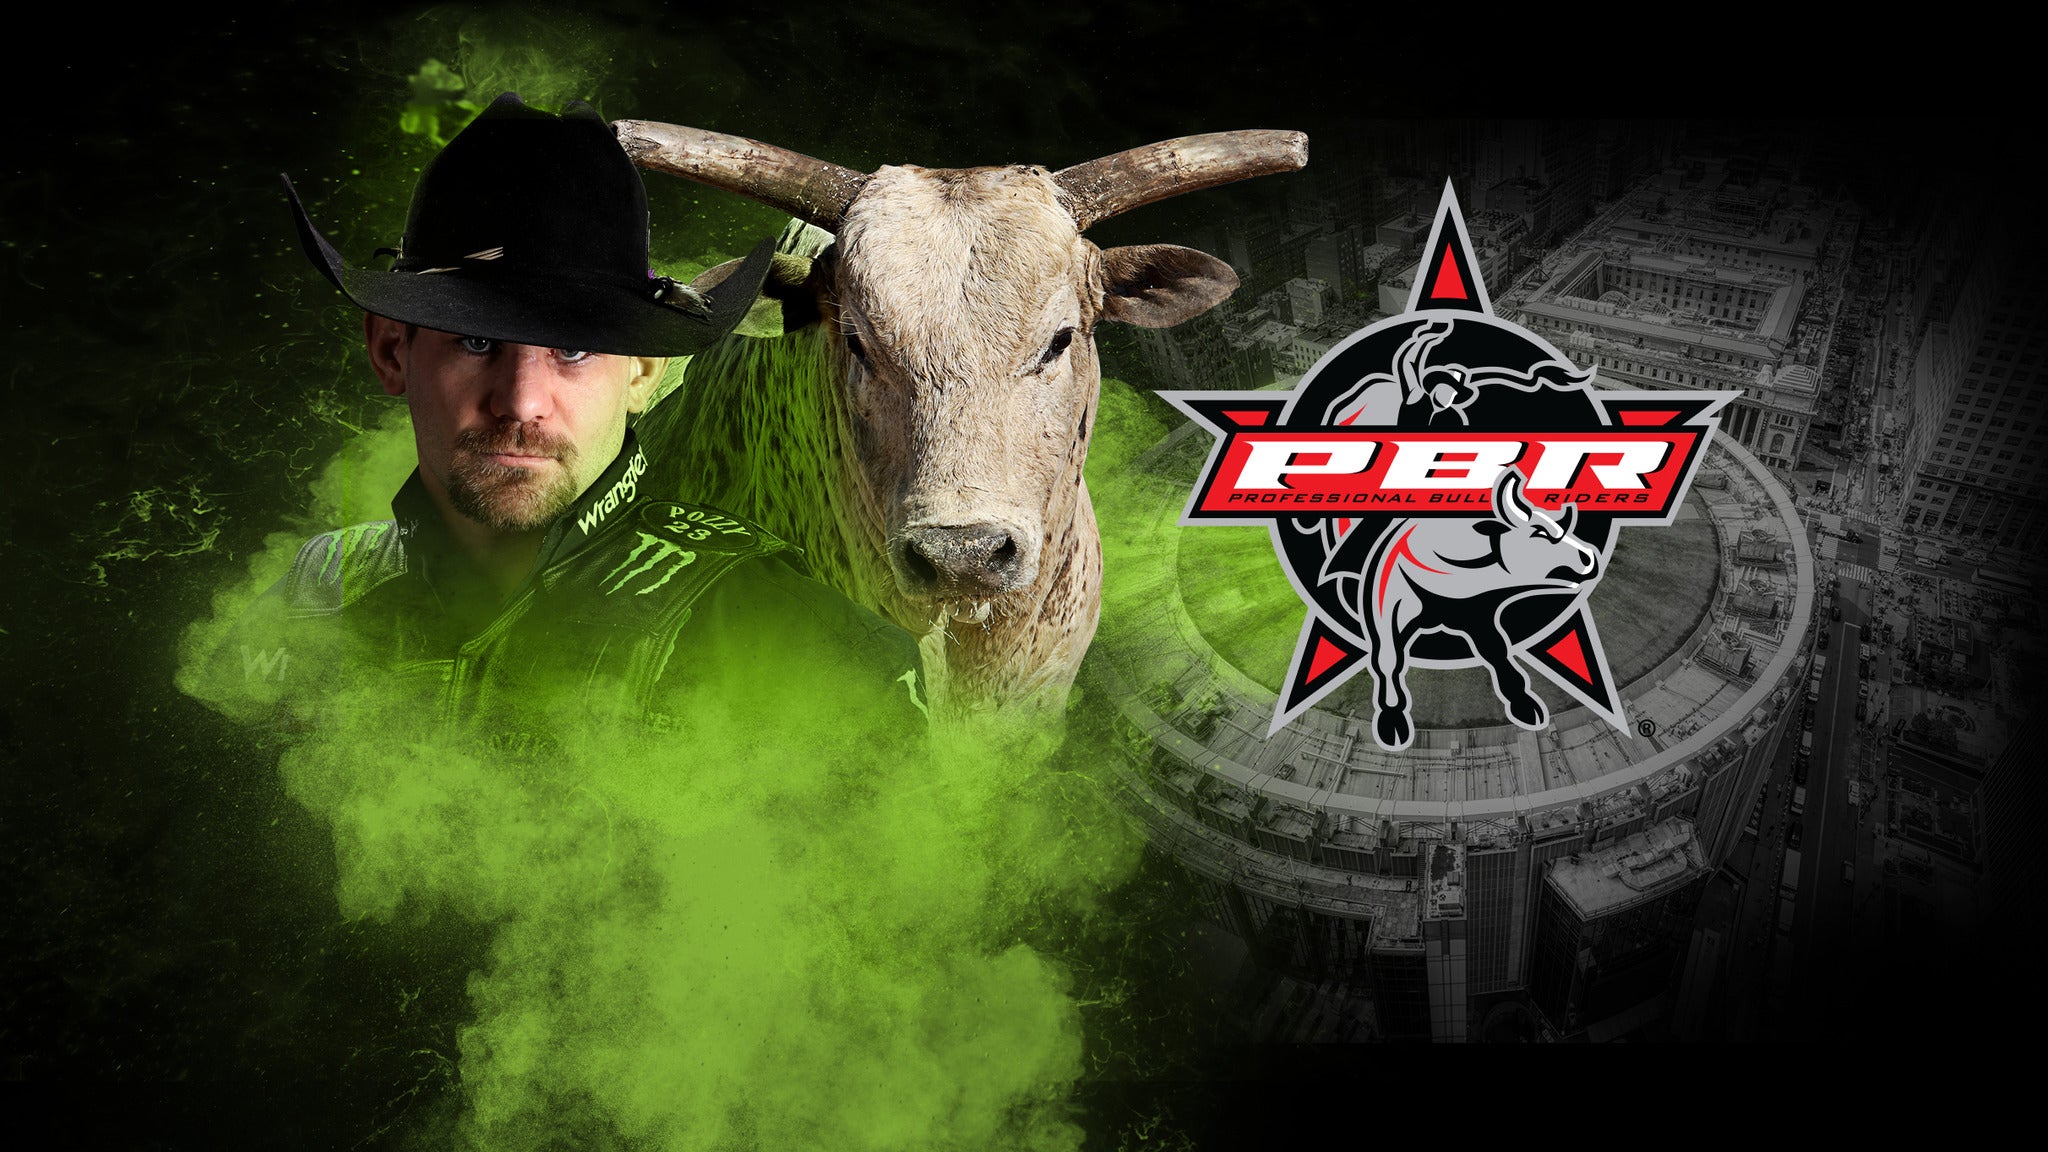 PBR: Unleash the Beast presale code for show tickets in Fort Worth, TX (Dickies Arena)